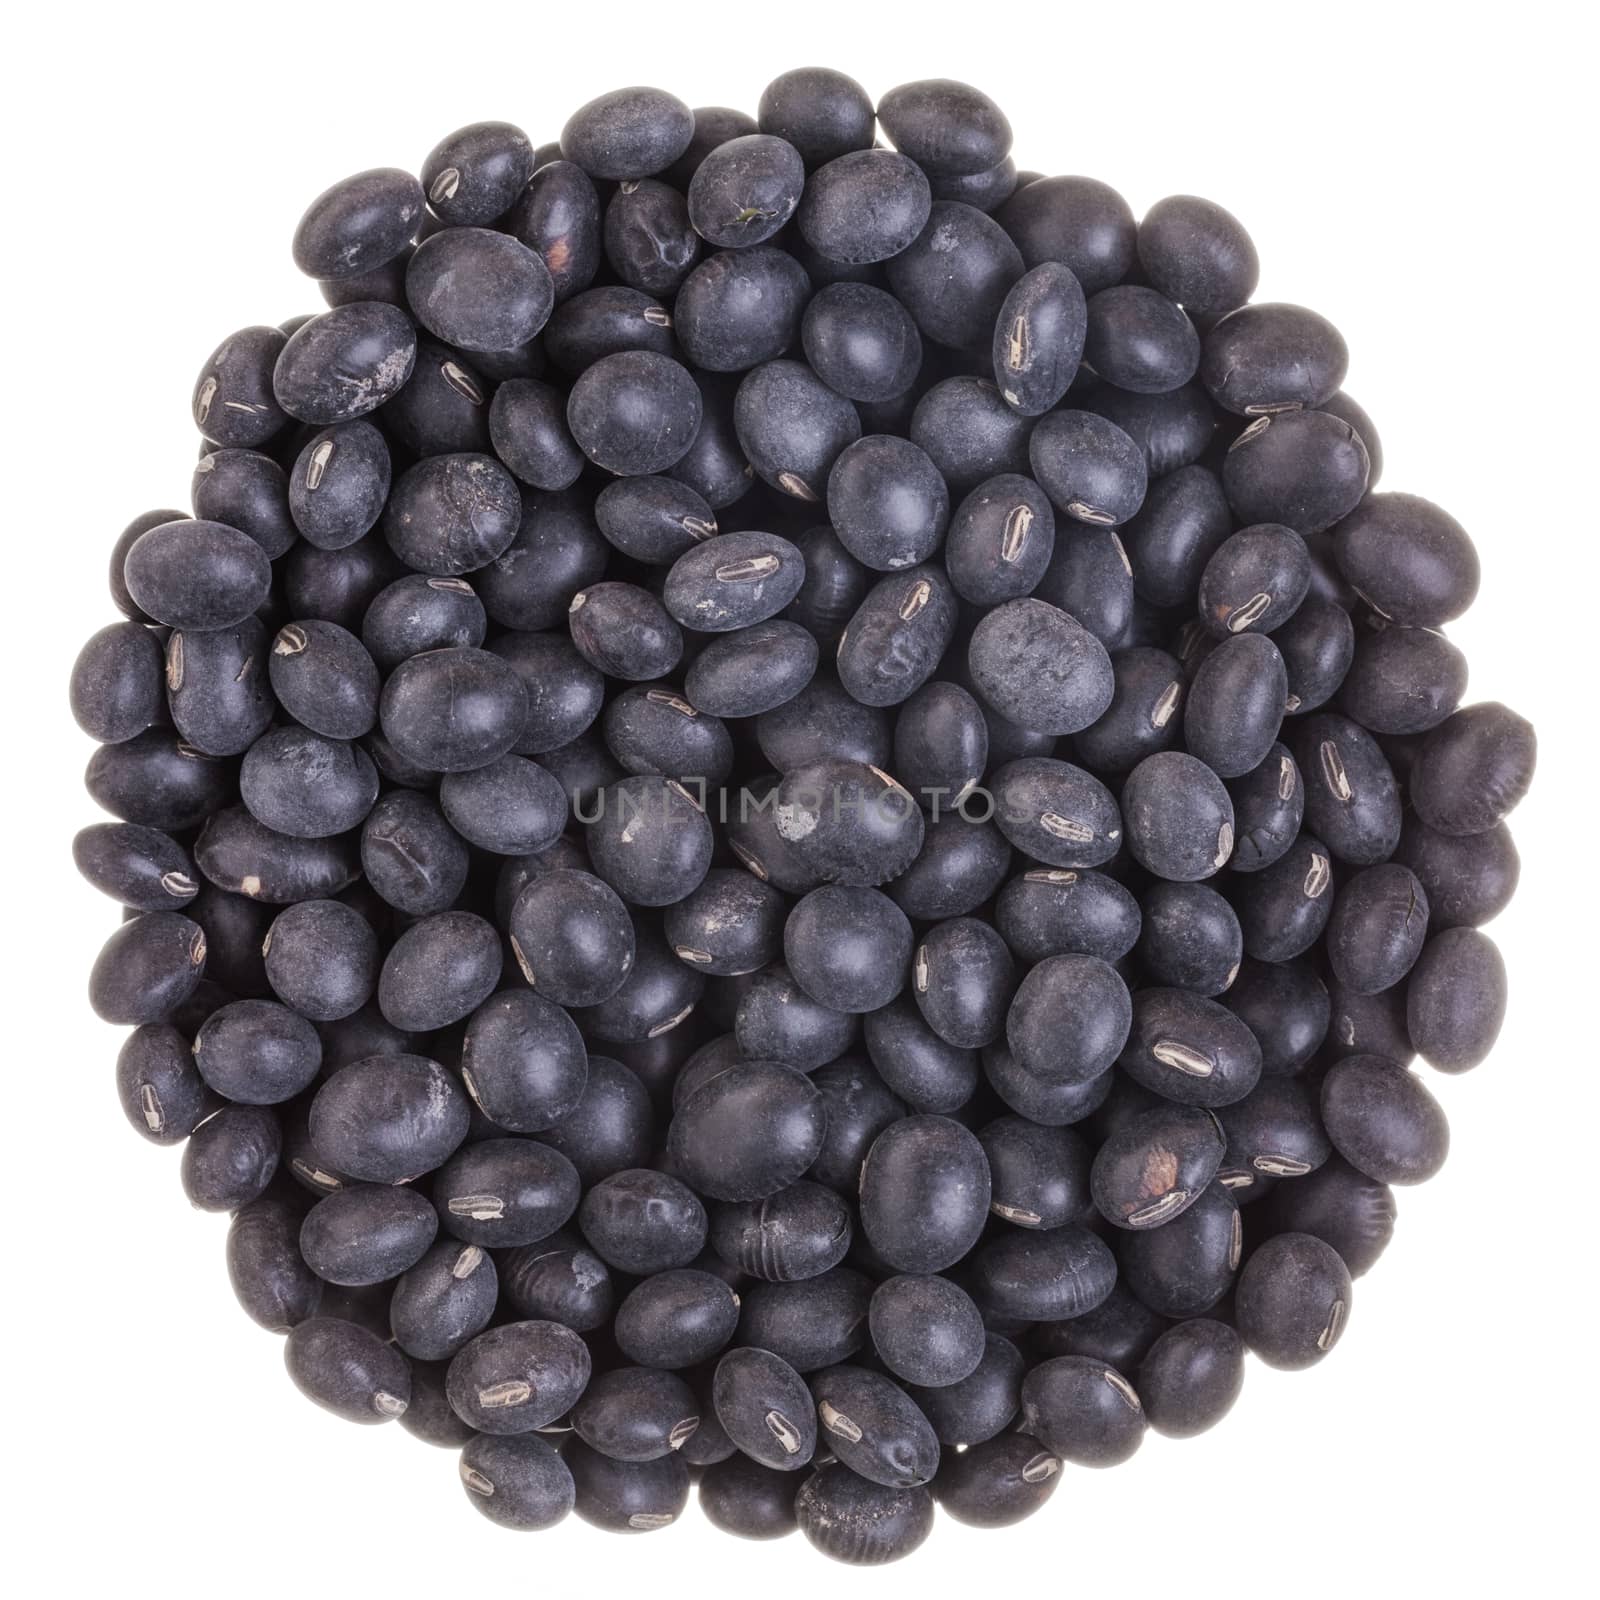 Perfect Circle Texture of Black Soy Beans